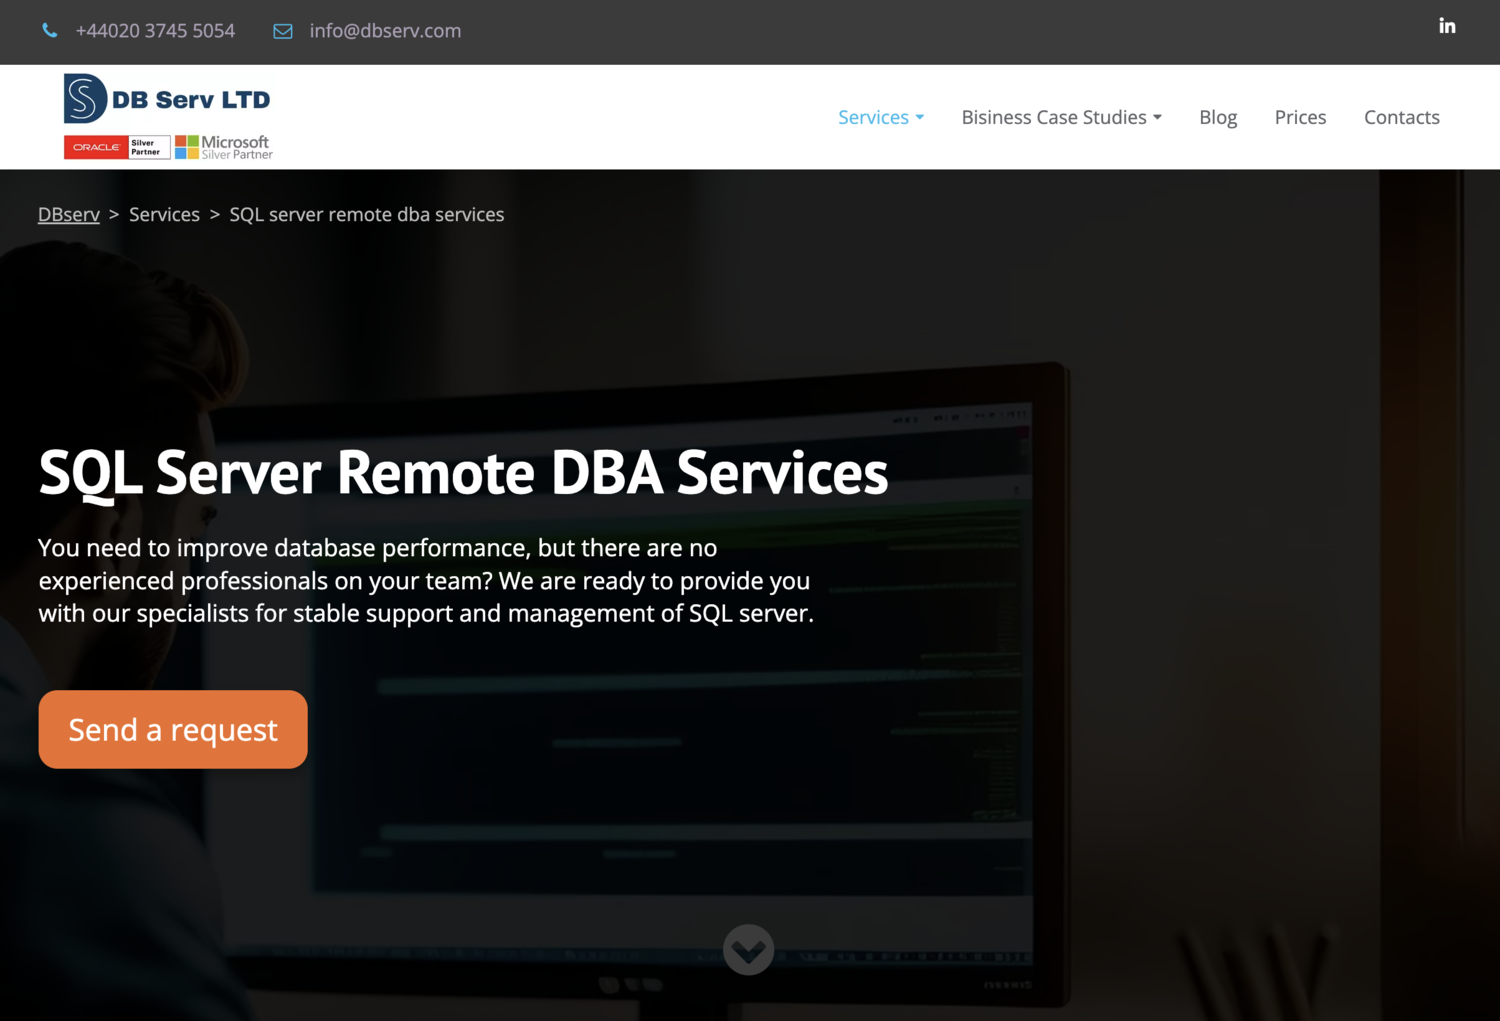 444020 3745 5054 info@dbserv.com

DB Serv LTD

 

DBsery > Services > SQL server remote dba services

SOL Server Remote DBA Services

You need to improve database performance, but there are no
experienced professionals on your team? We are ready to provide you
with our specialists for stable support and management of SQL server.